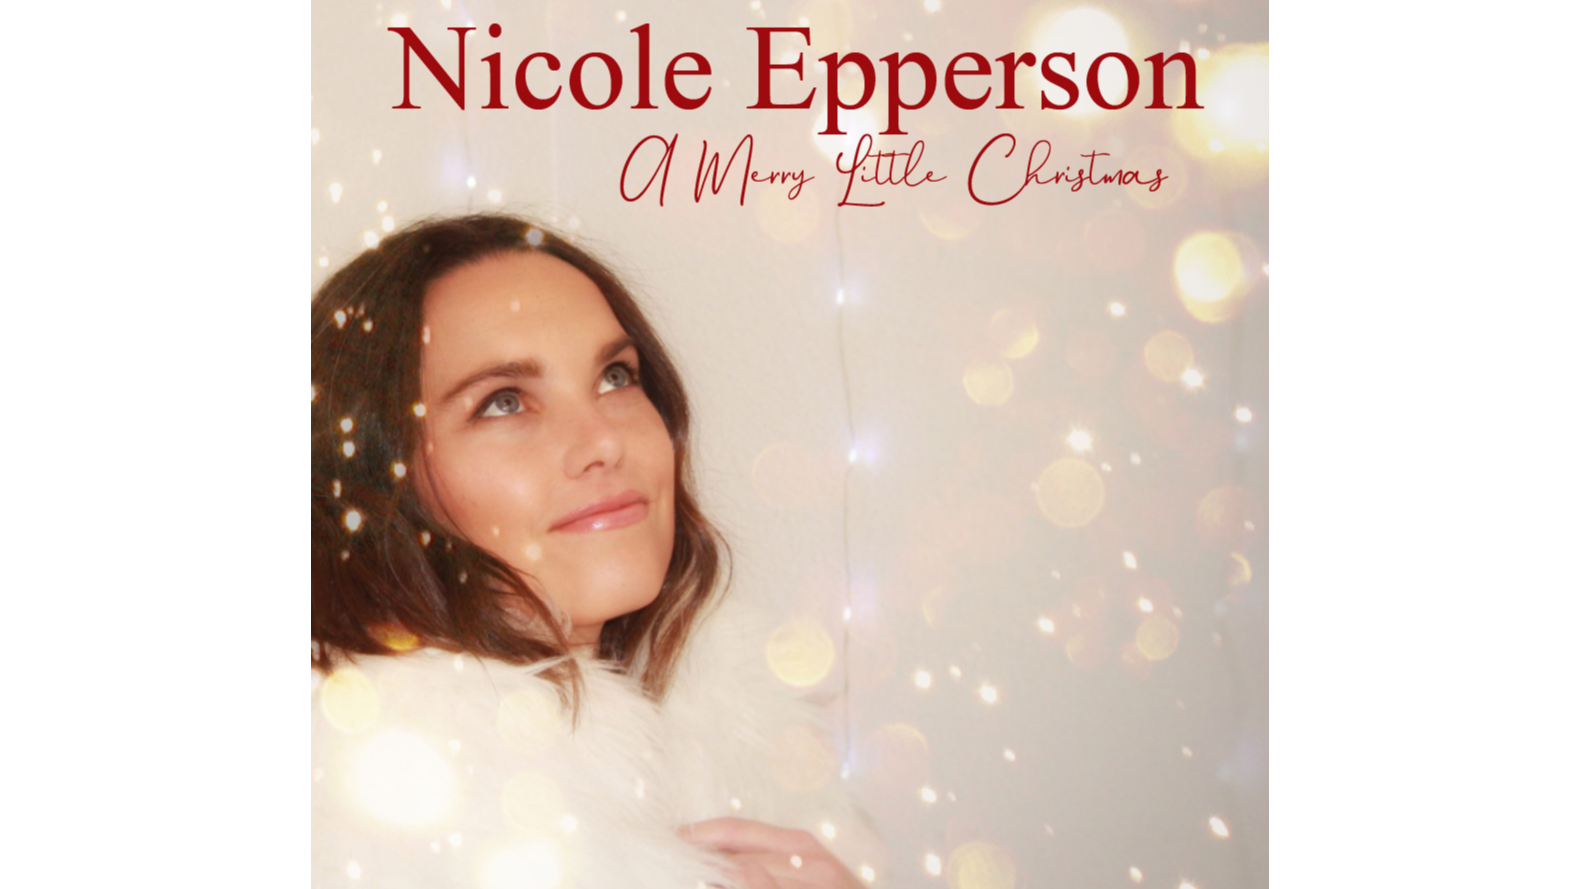 Nicole Epperson Releases Family Christmas Album With Fresh Take On Old Songs